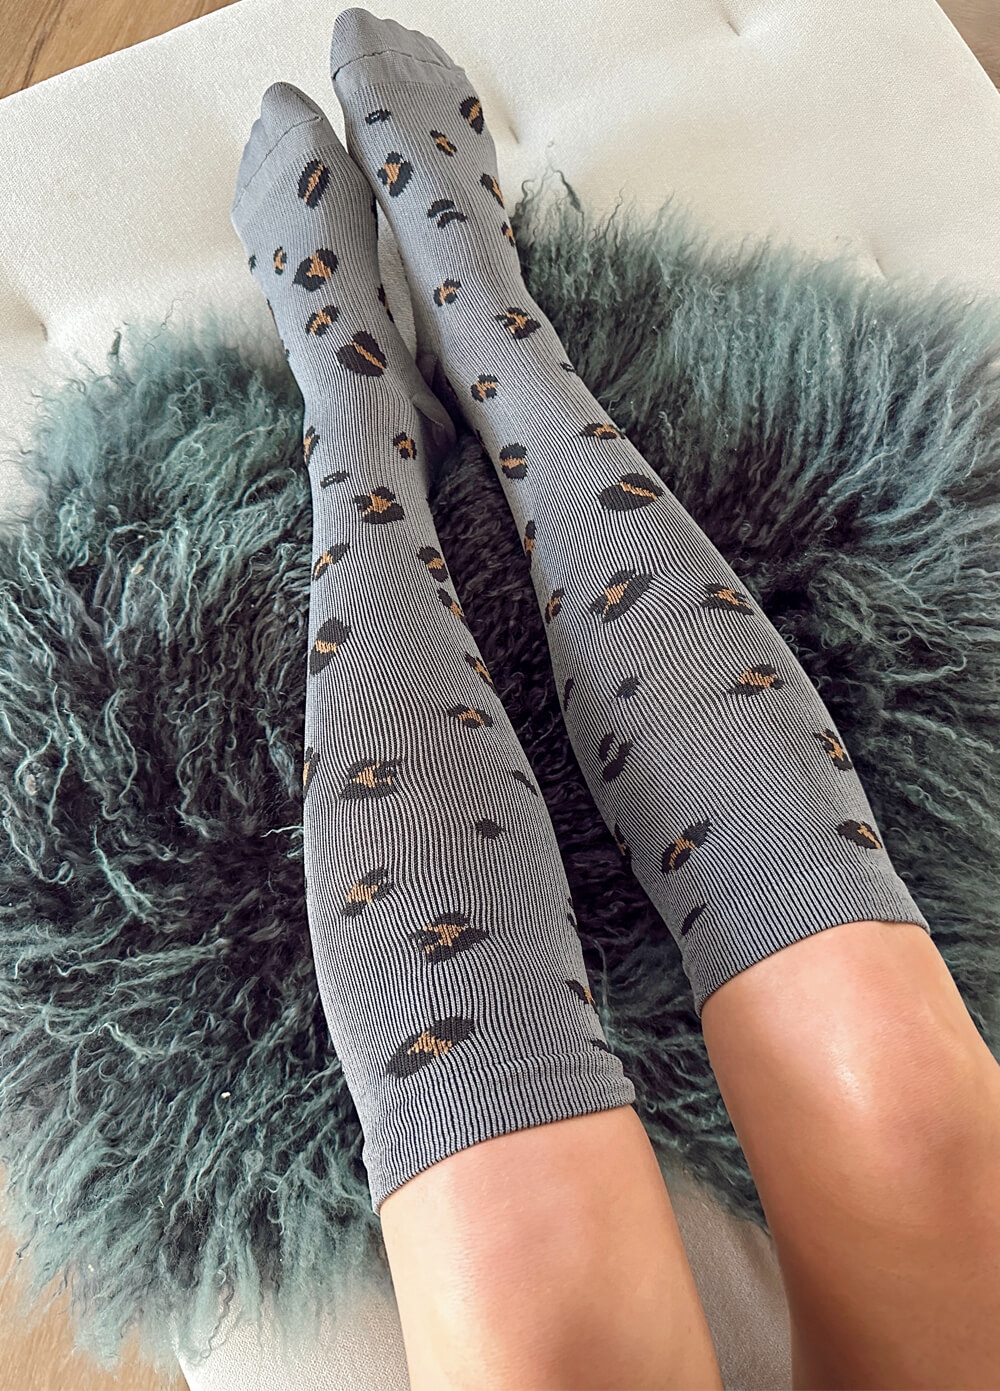 Mama Sox - Excite Maternity Compression Socks in Grey Leopard